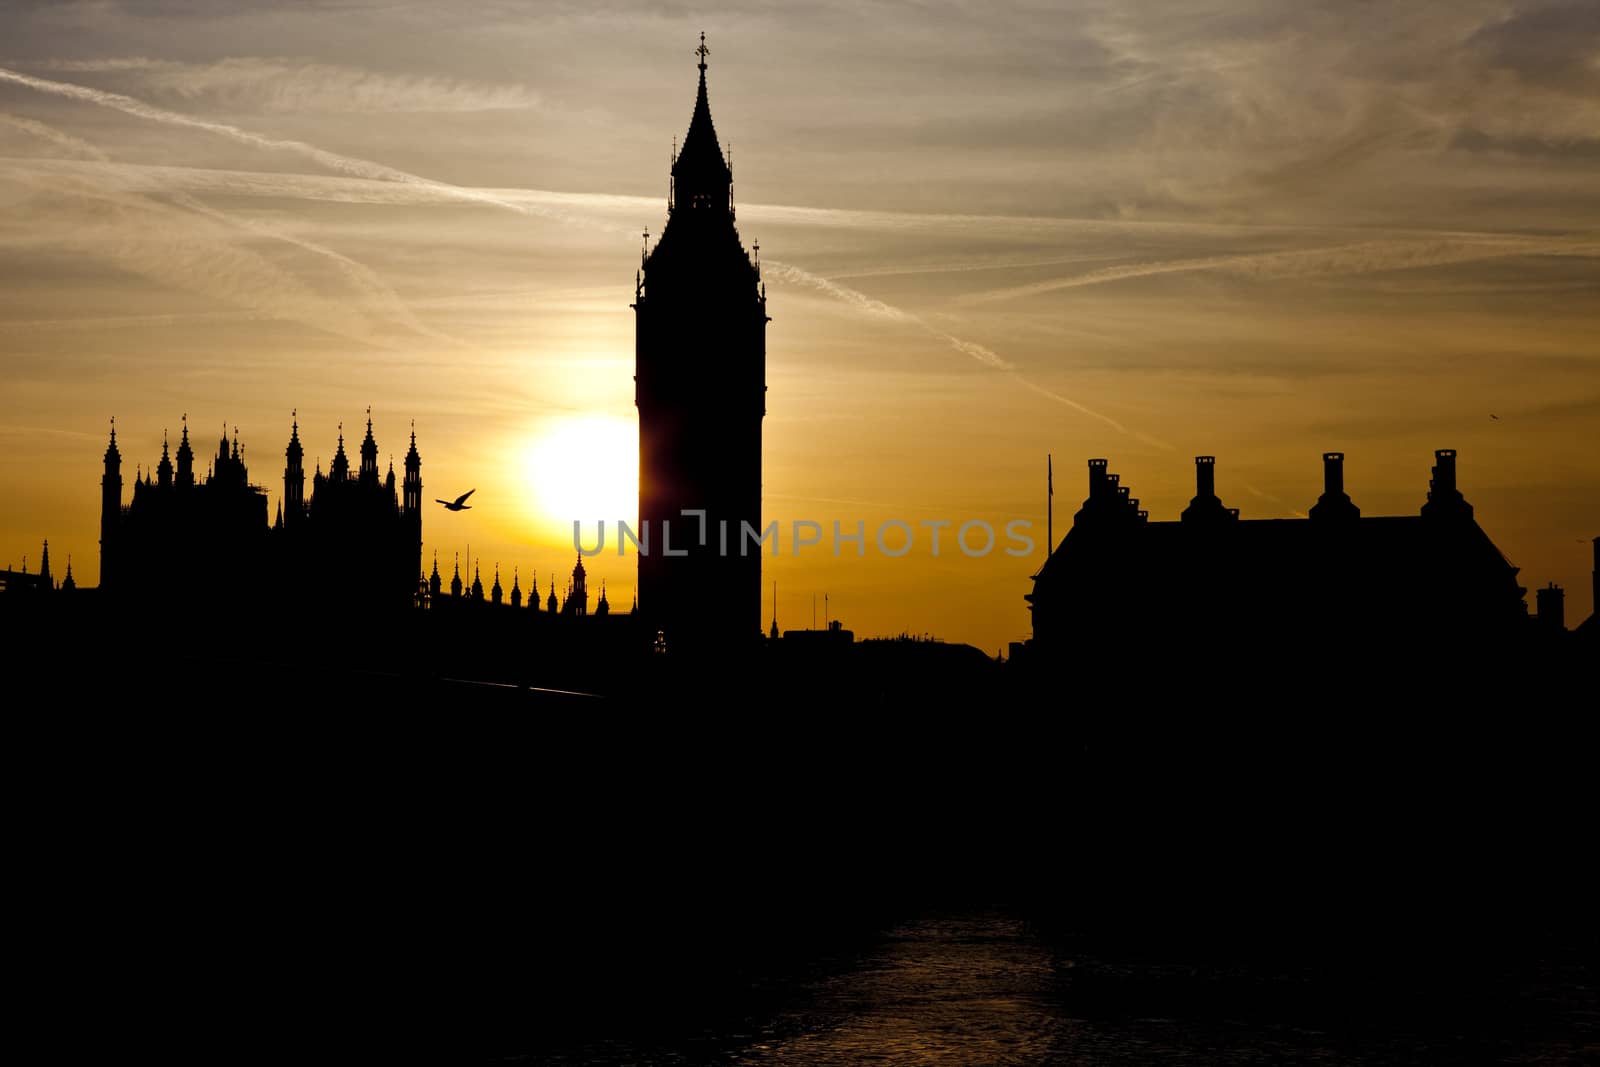 A view of Westminster in London at sunset.